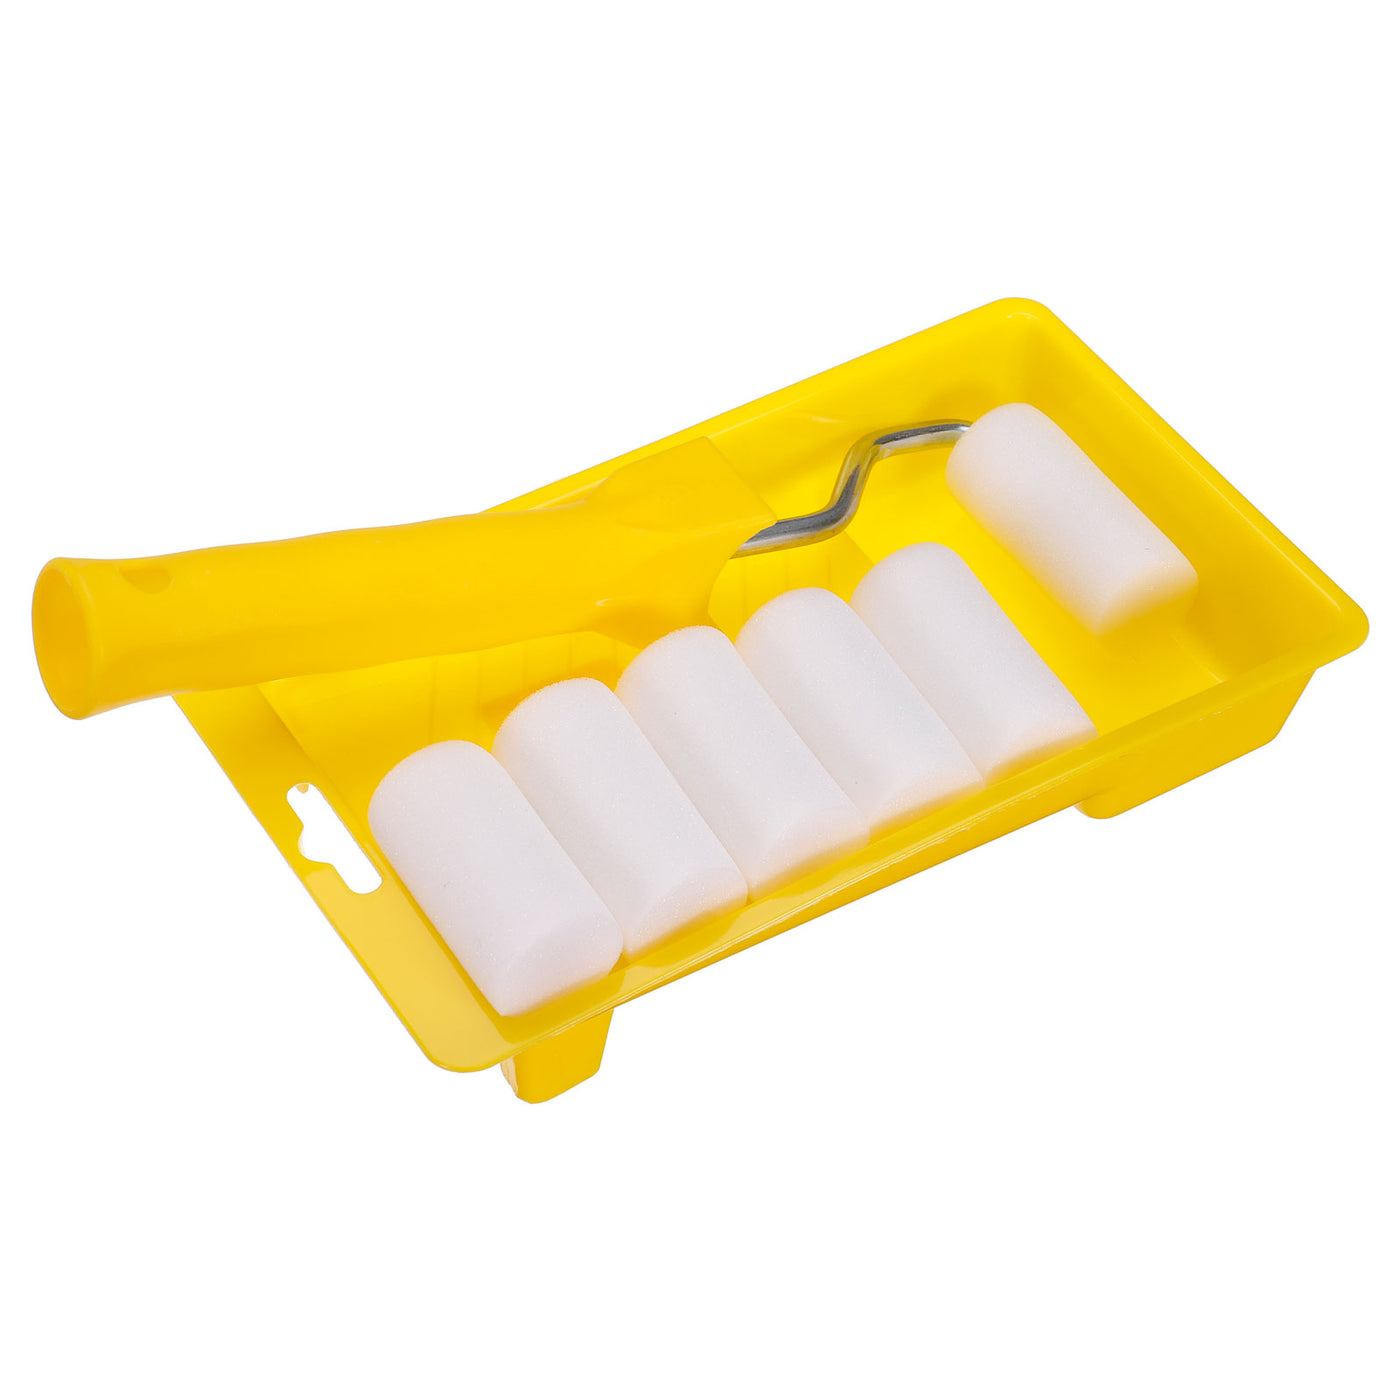 uxcell Uxcell 8Pcs Paint Roller Kit, 2" 5mm Thick Oily-Based Foam Rollers, Tray, 20cm Frame